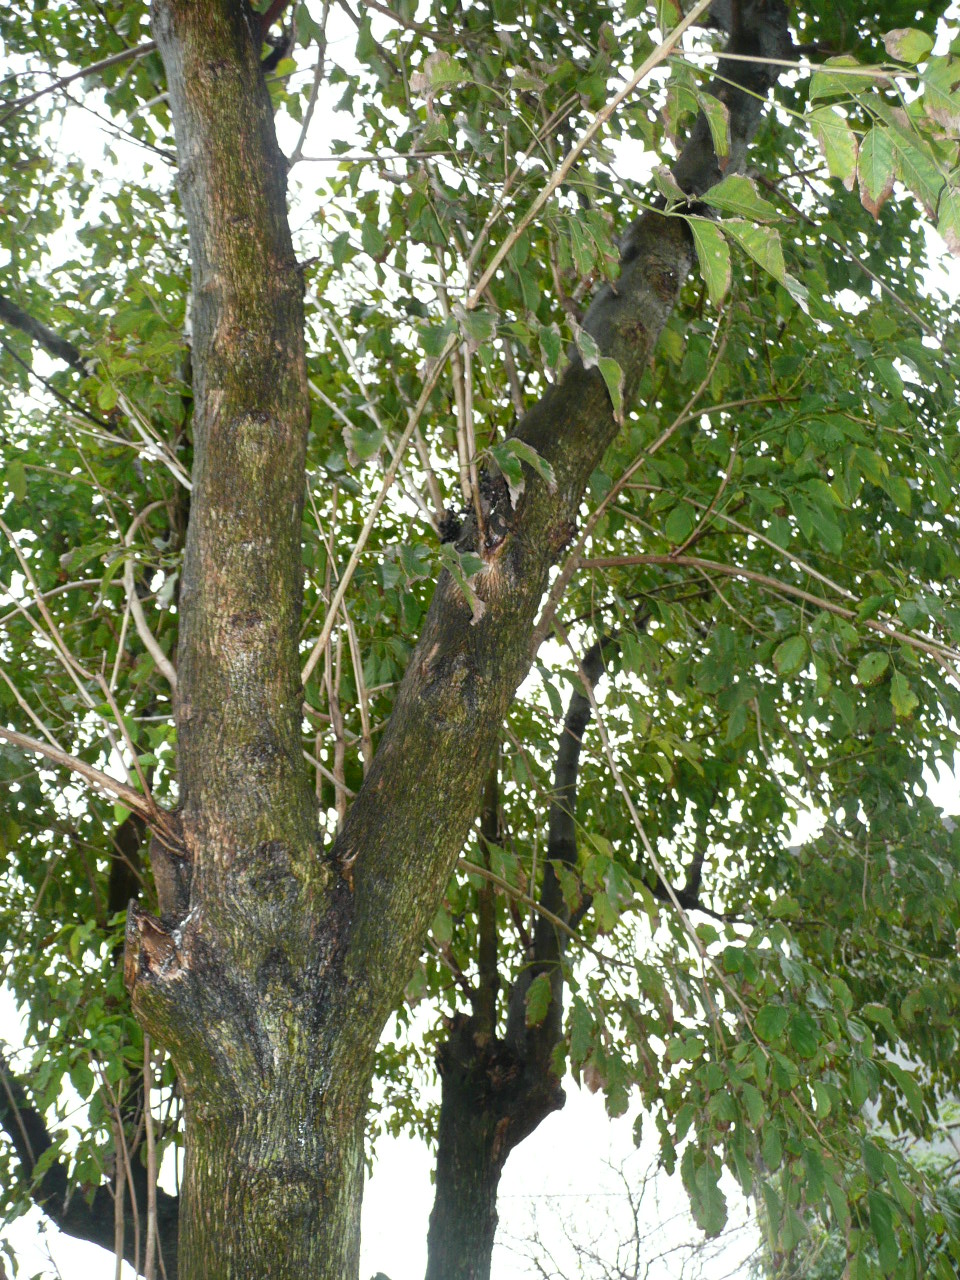 cats climbing up the nches of a tree